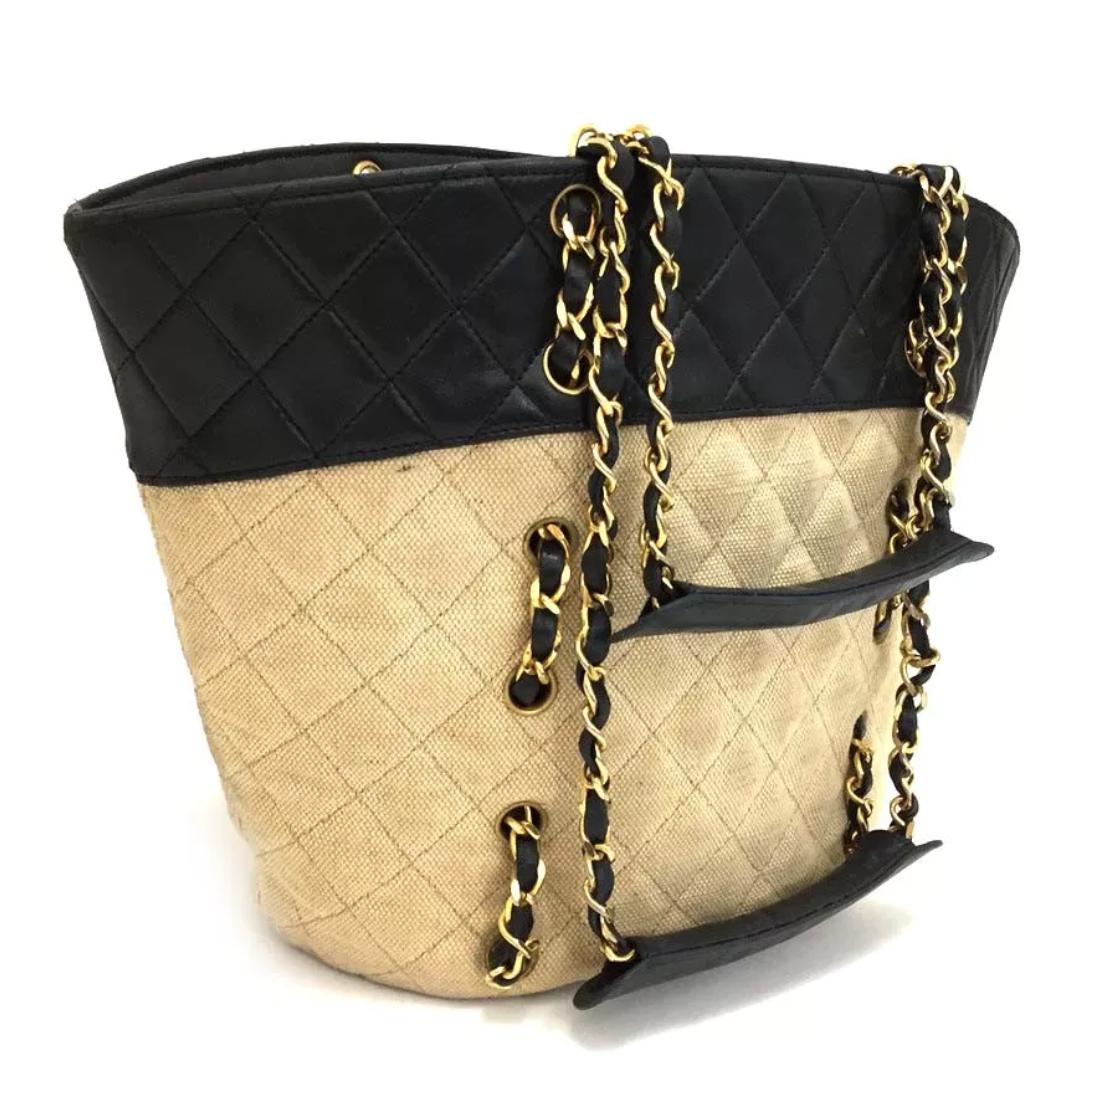 Chanel Rainbow Logo Quilted Textile Tote Gold Hardware, 2021 (Like New), Womens Handbag